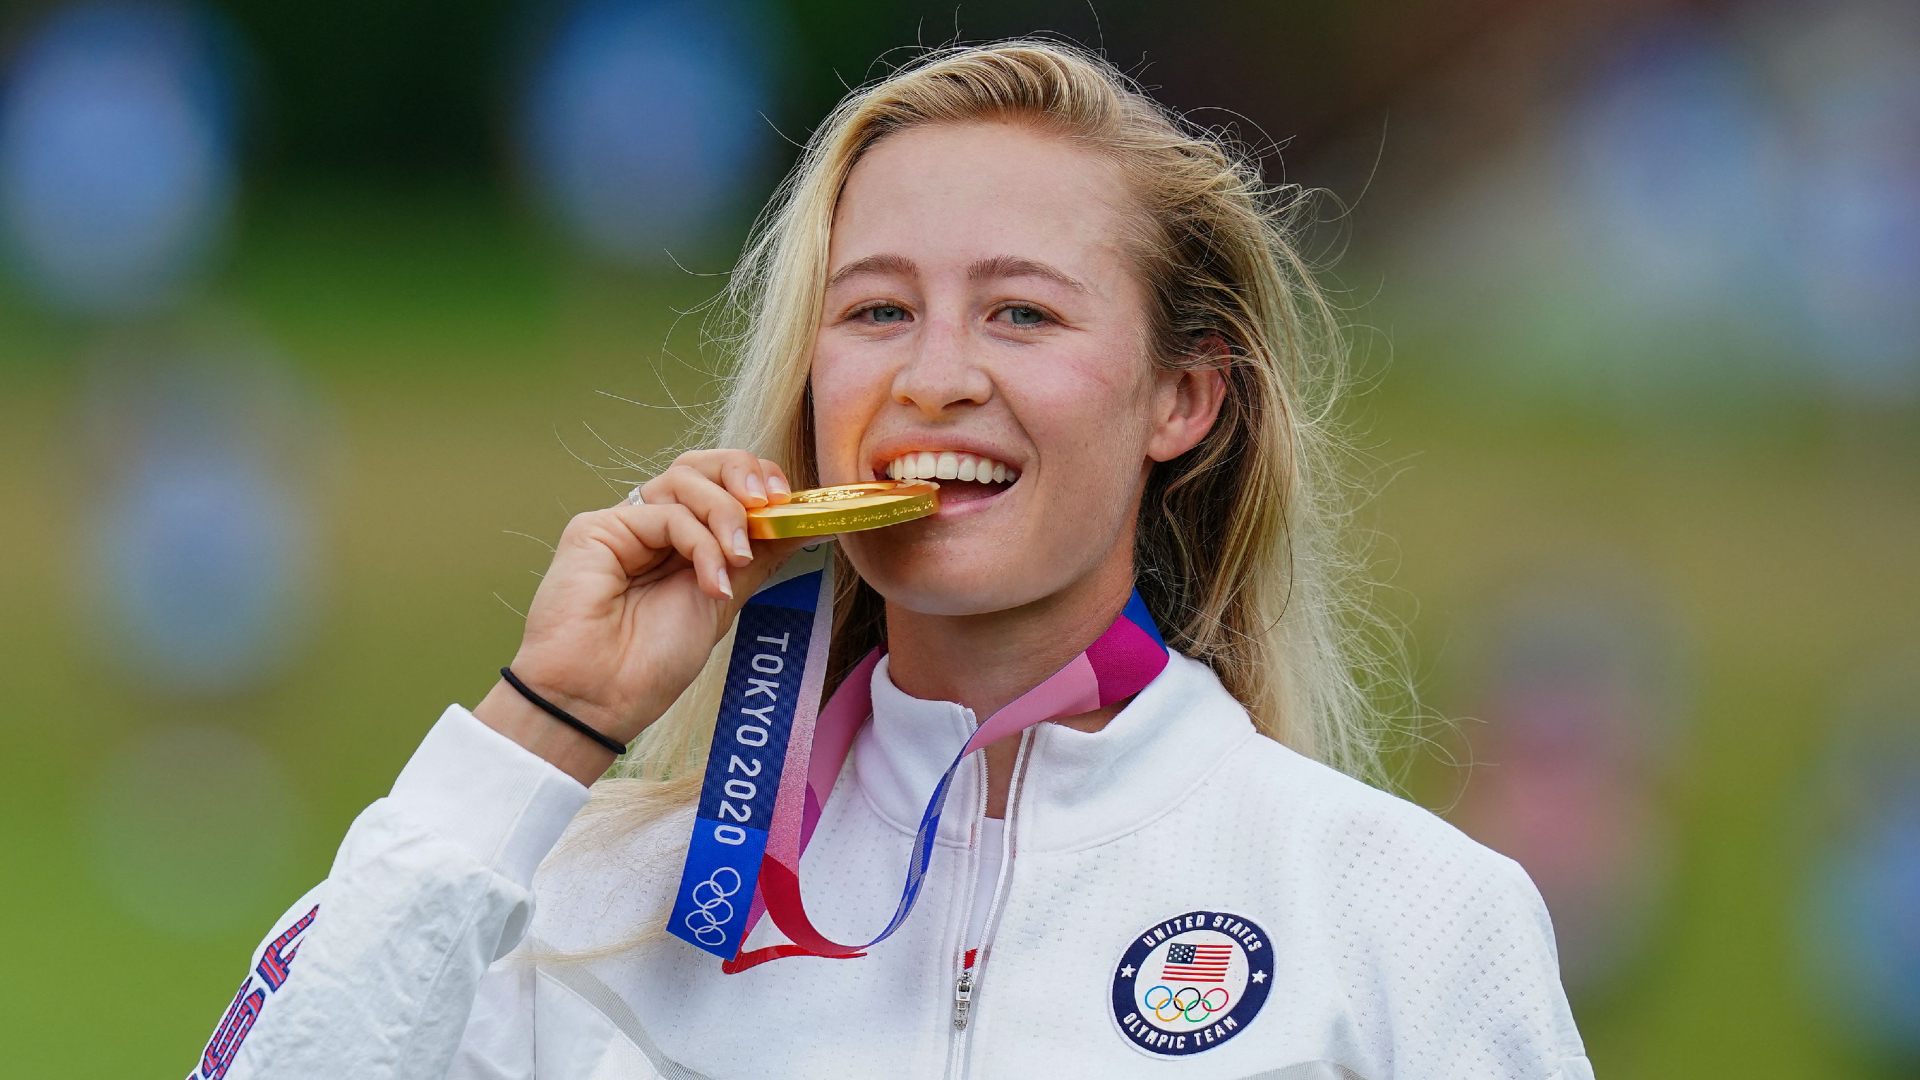 American emerging golf superstar Nelly Korda landed Olympic gold and now moves on to her next challenge, bidding to win the Women's Open.